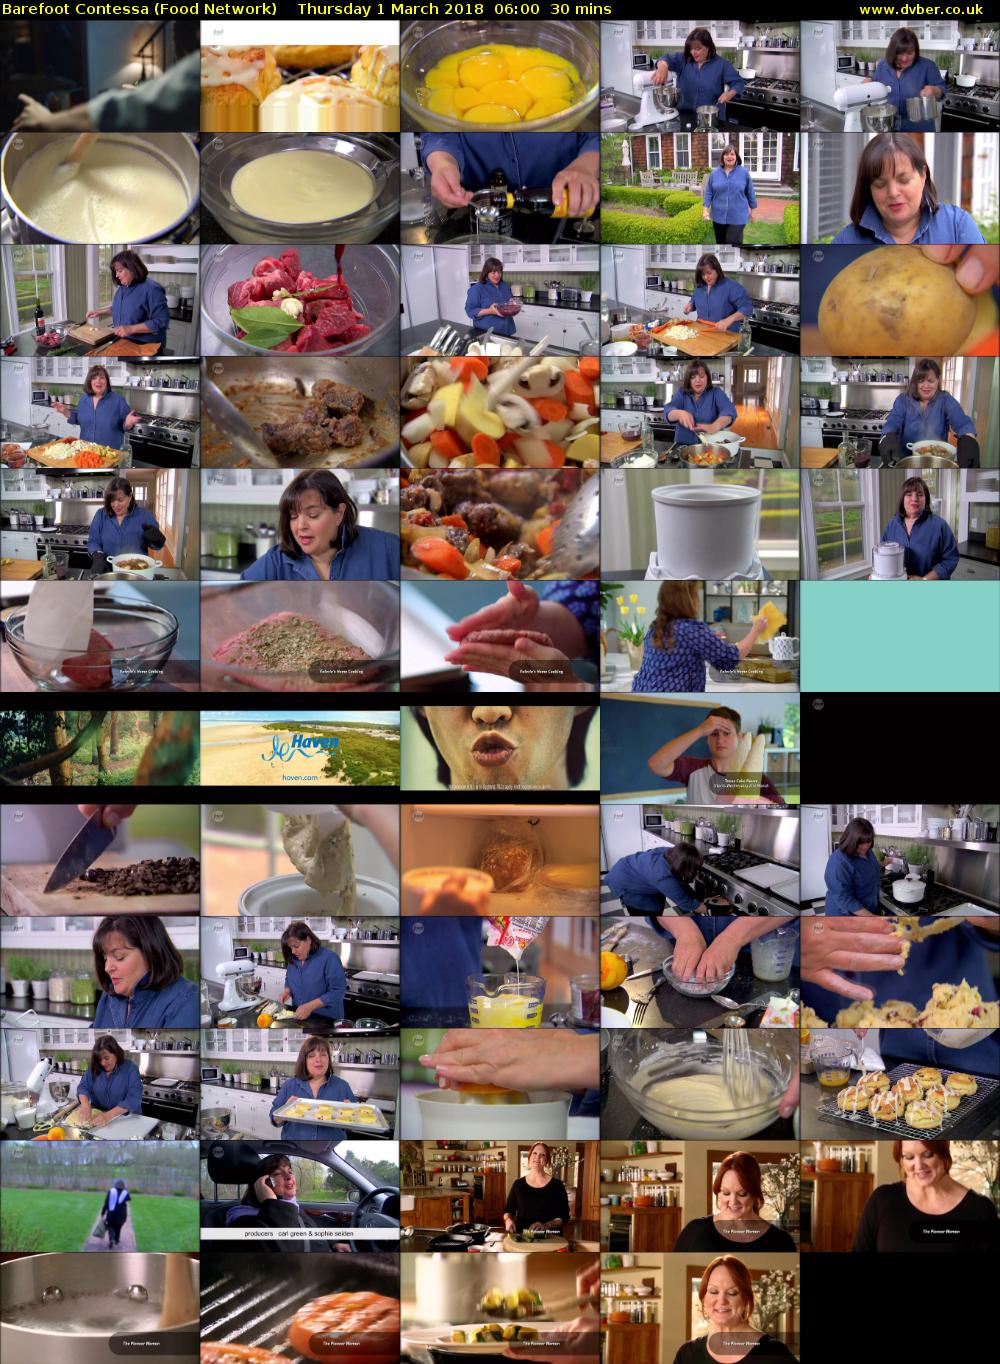 Barefoot Contessa (Food Network) Thursday 1 March 2018 06:00 - 06:30